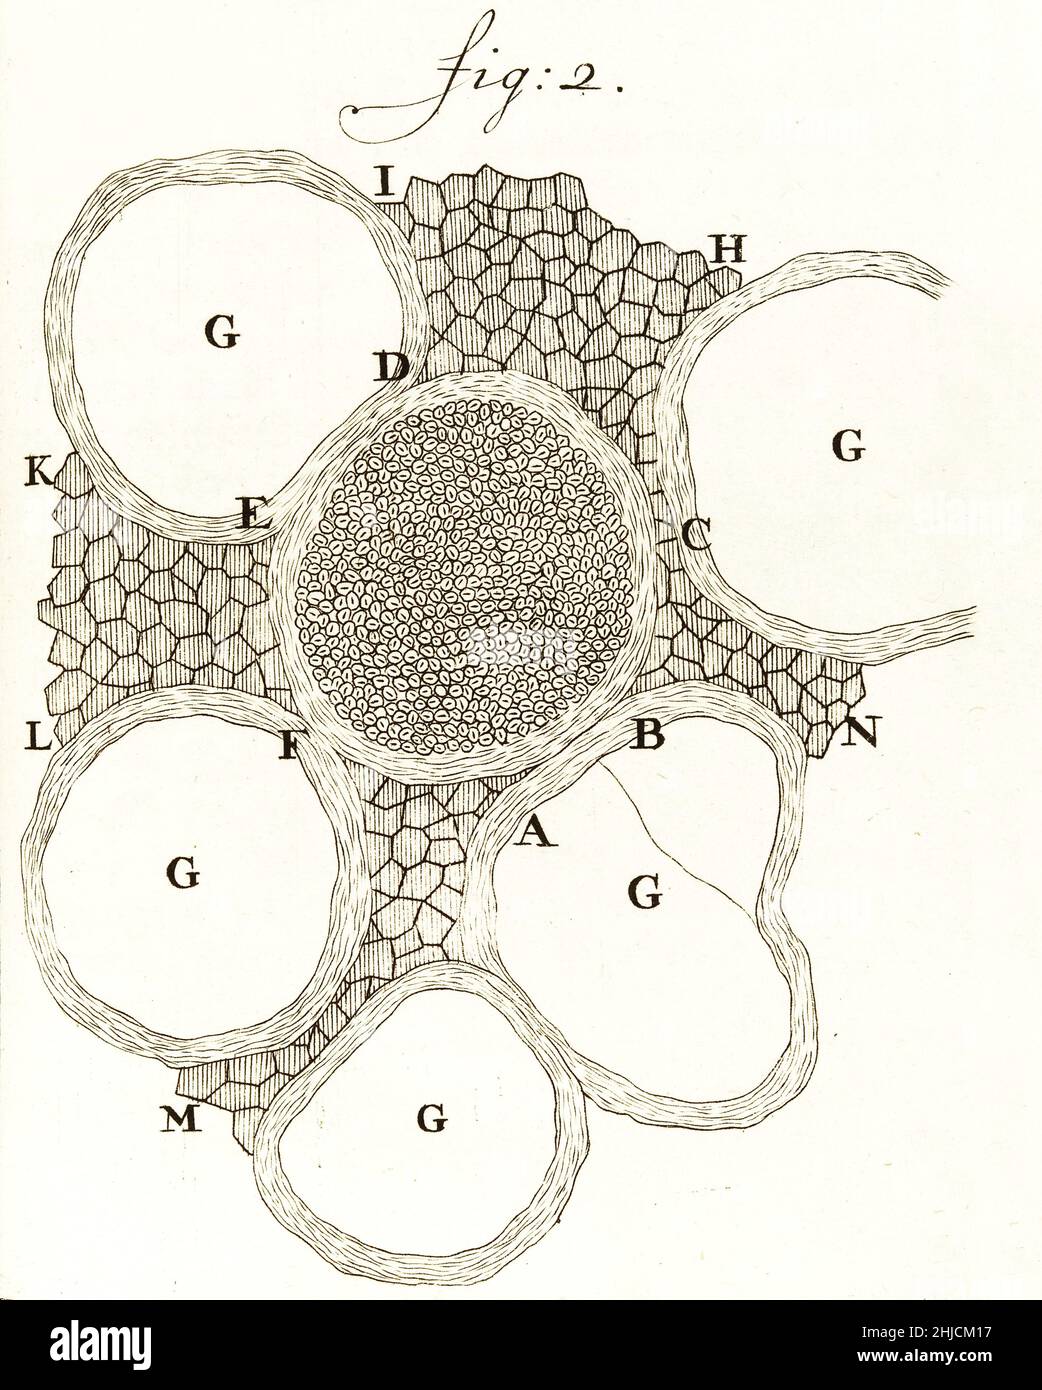 Nerves from the spinal marrow of cows and sheep, cut out and examined with the aid of the microscope. Observed and drawn by Anthony van Leeuwenhoek, 1719. Leeuwenhoek (1632-1723) was a Dutch scientist, now considered the first microbiologist. He is best known for his work on the improvement of the microscope and for his contributions towards the establishment of microbiology. Stock Photo